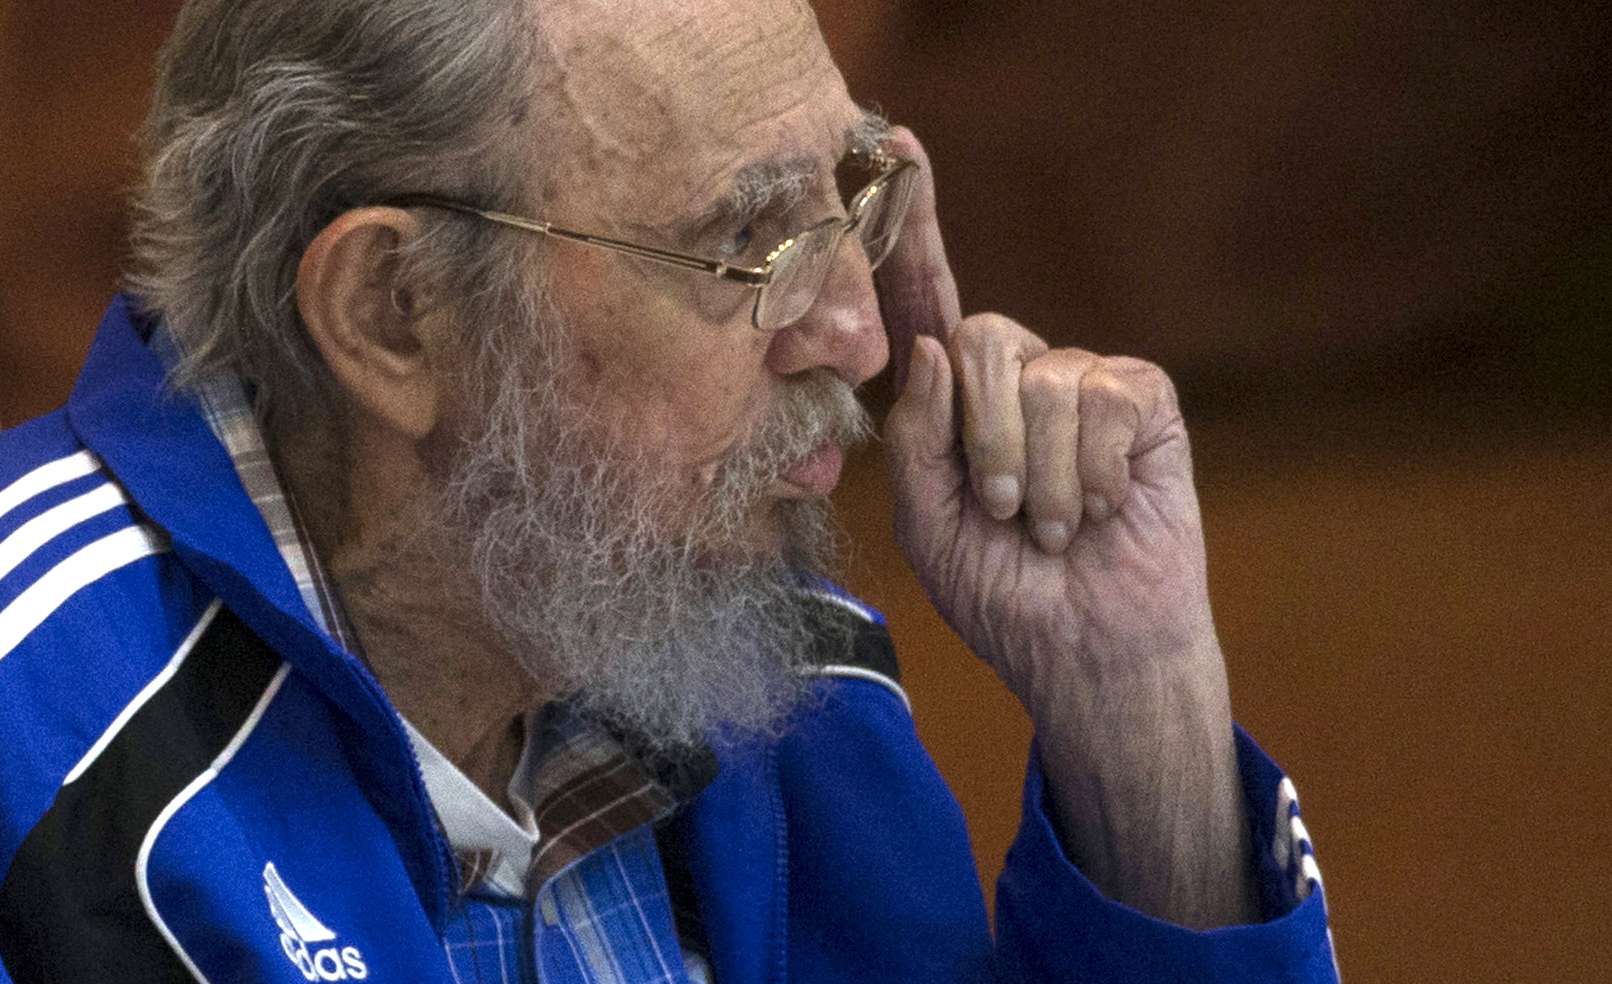 Fidel Castro addresses delegates on the last day of the 7th Cuban Communist Party Congress in Havana on Tuesday. Photo: AP